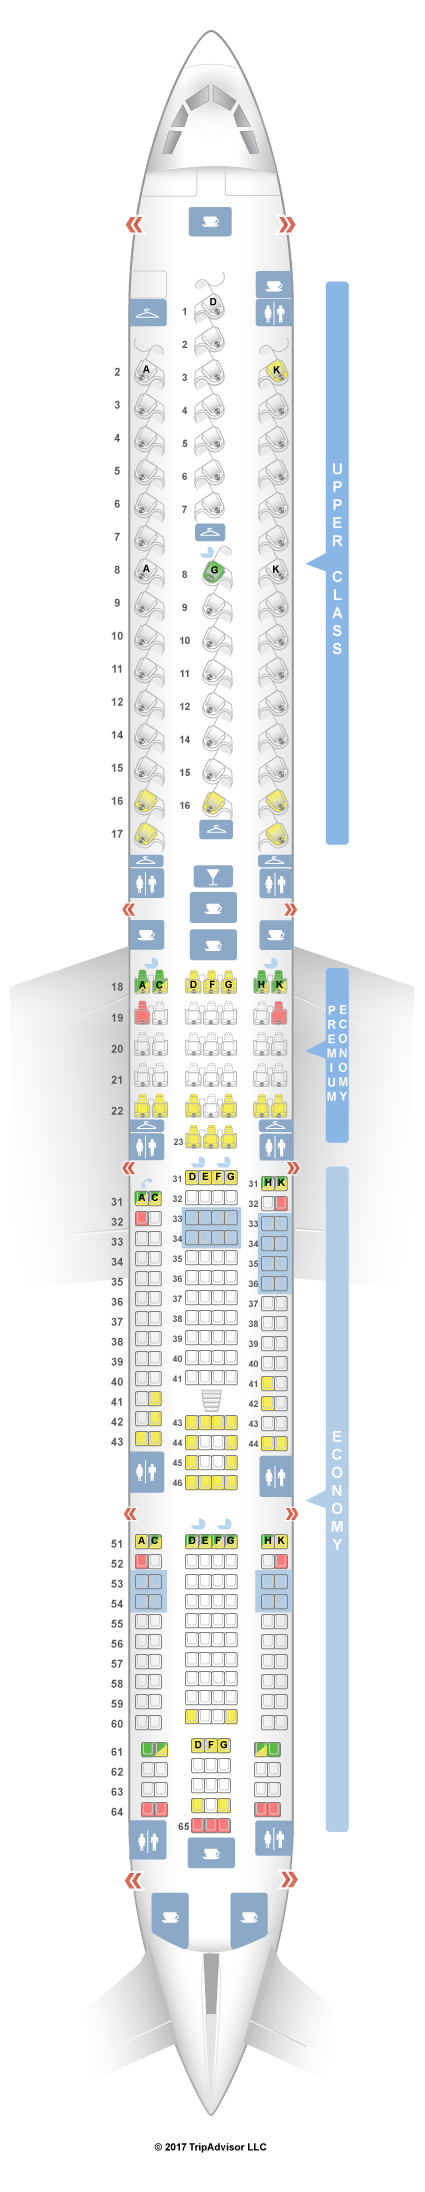 Delta 4365 Seating Chart